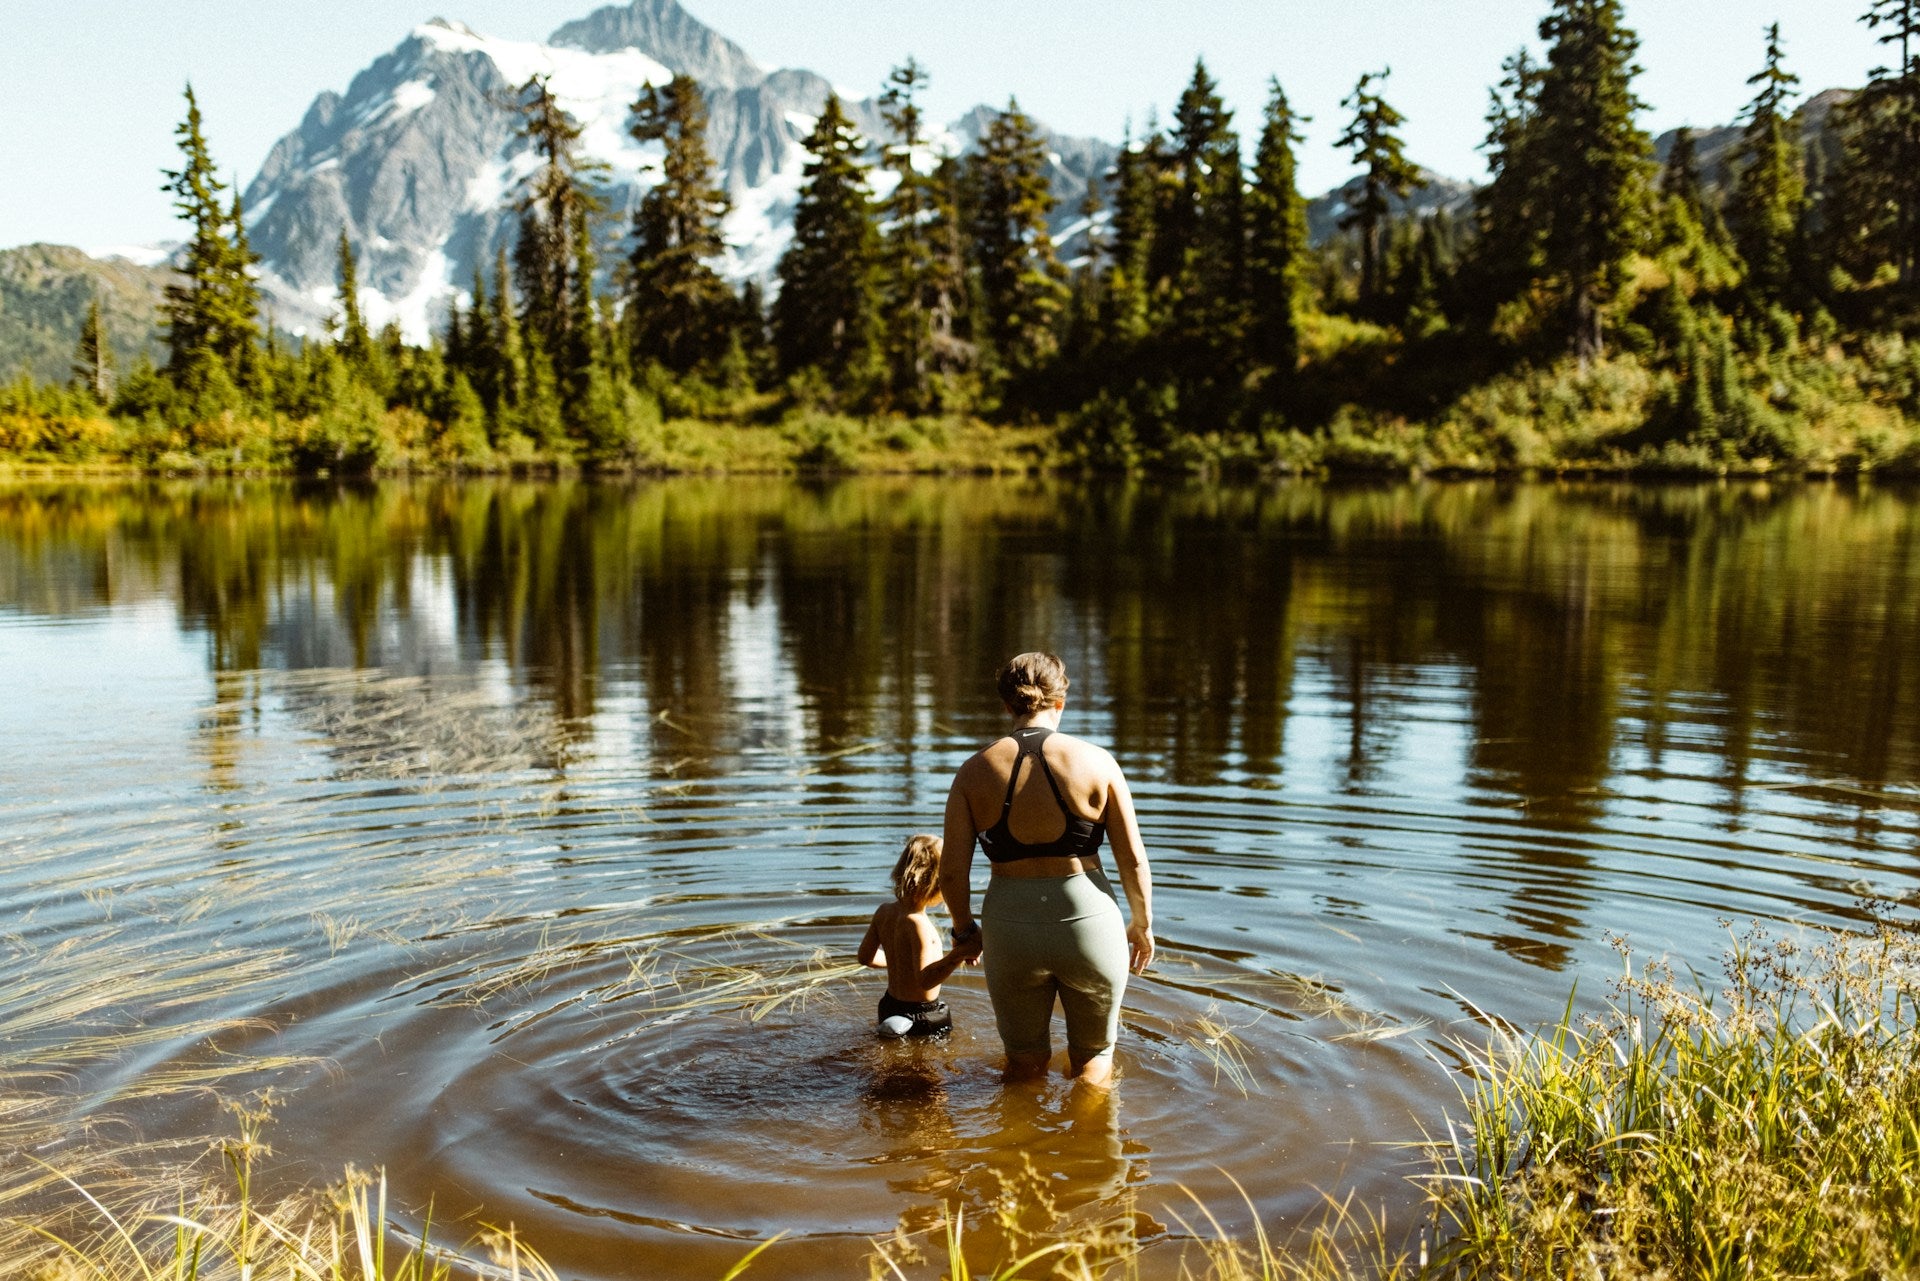 A woman and a young child walking into an alpine lake in the summer with gorgeous mountains in the background